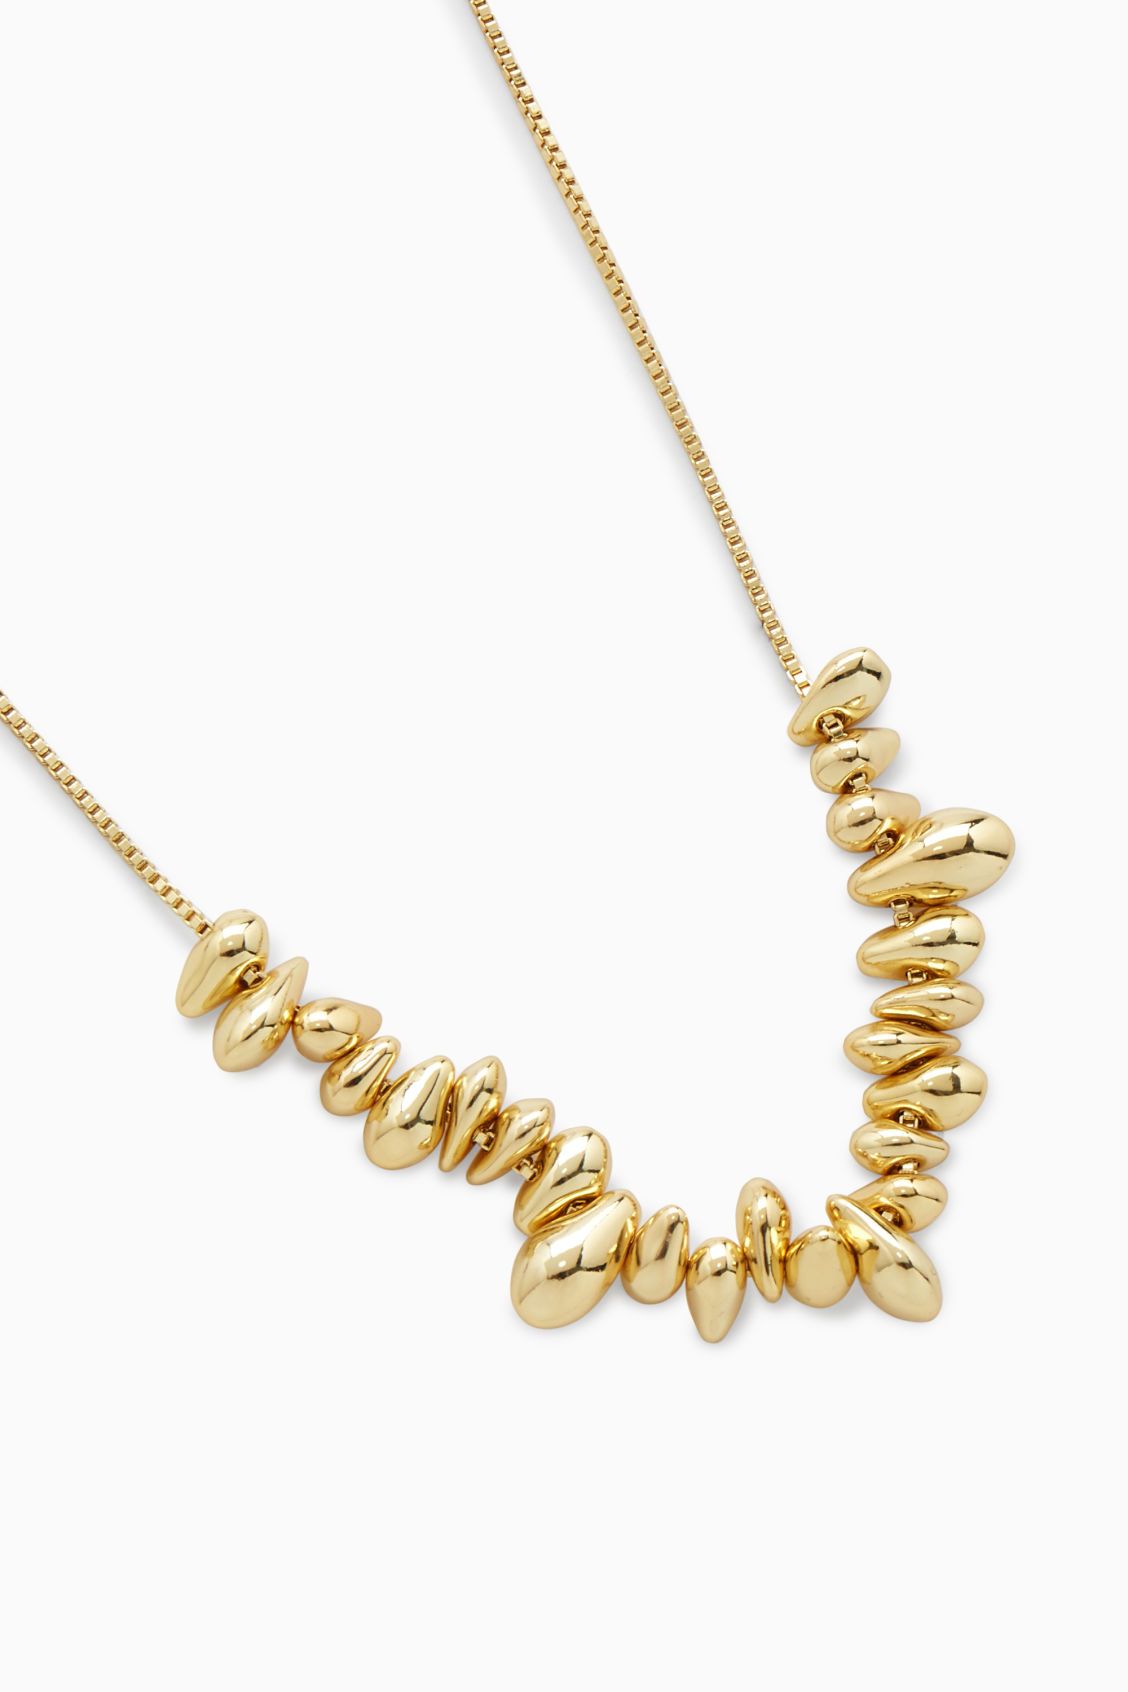 BEADED BOX CHAIN NECKLACE - GOLD - COS | COS UK